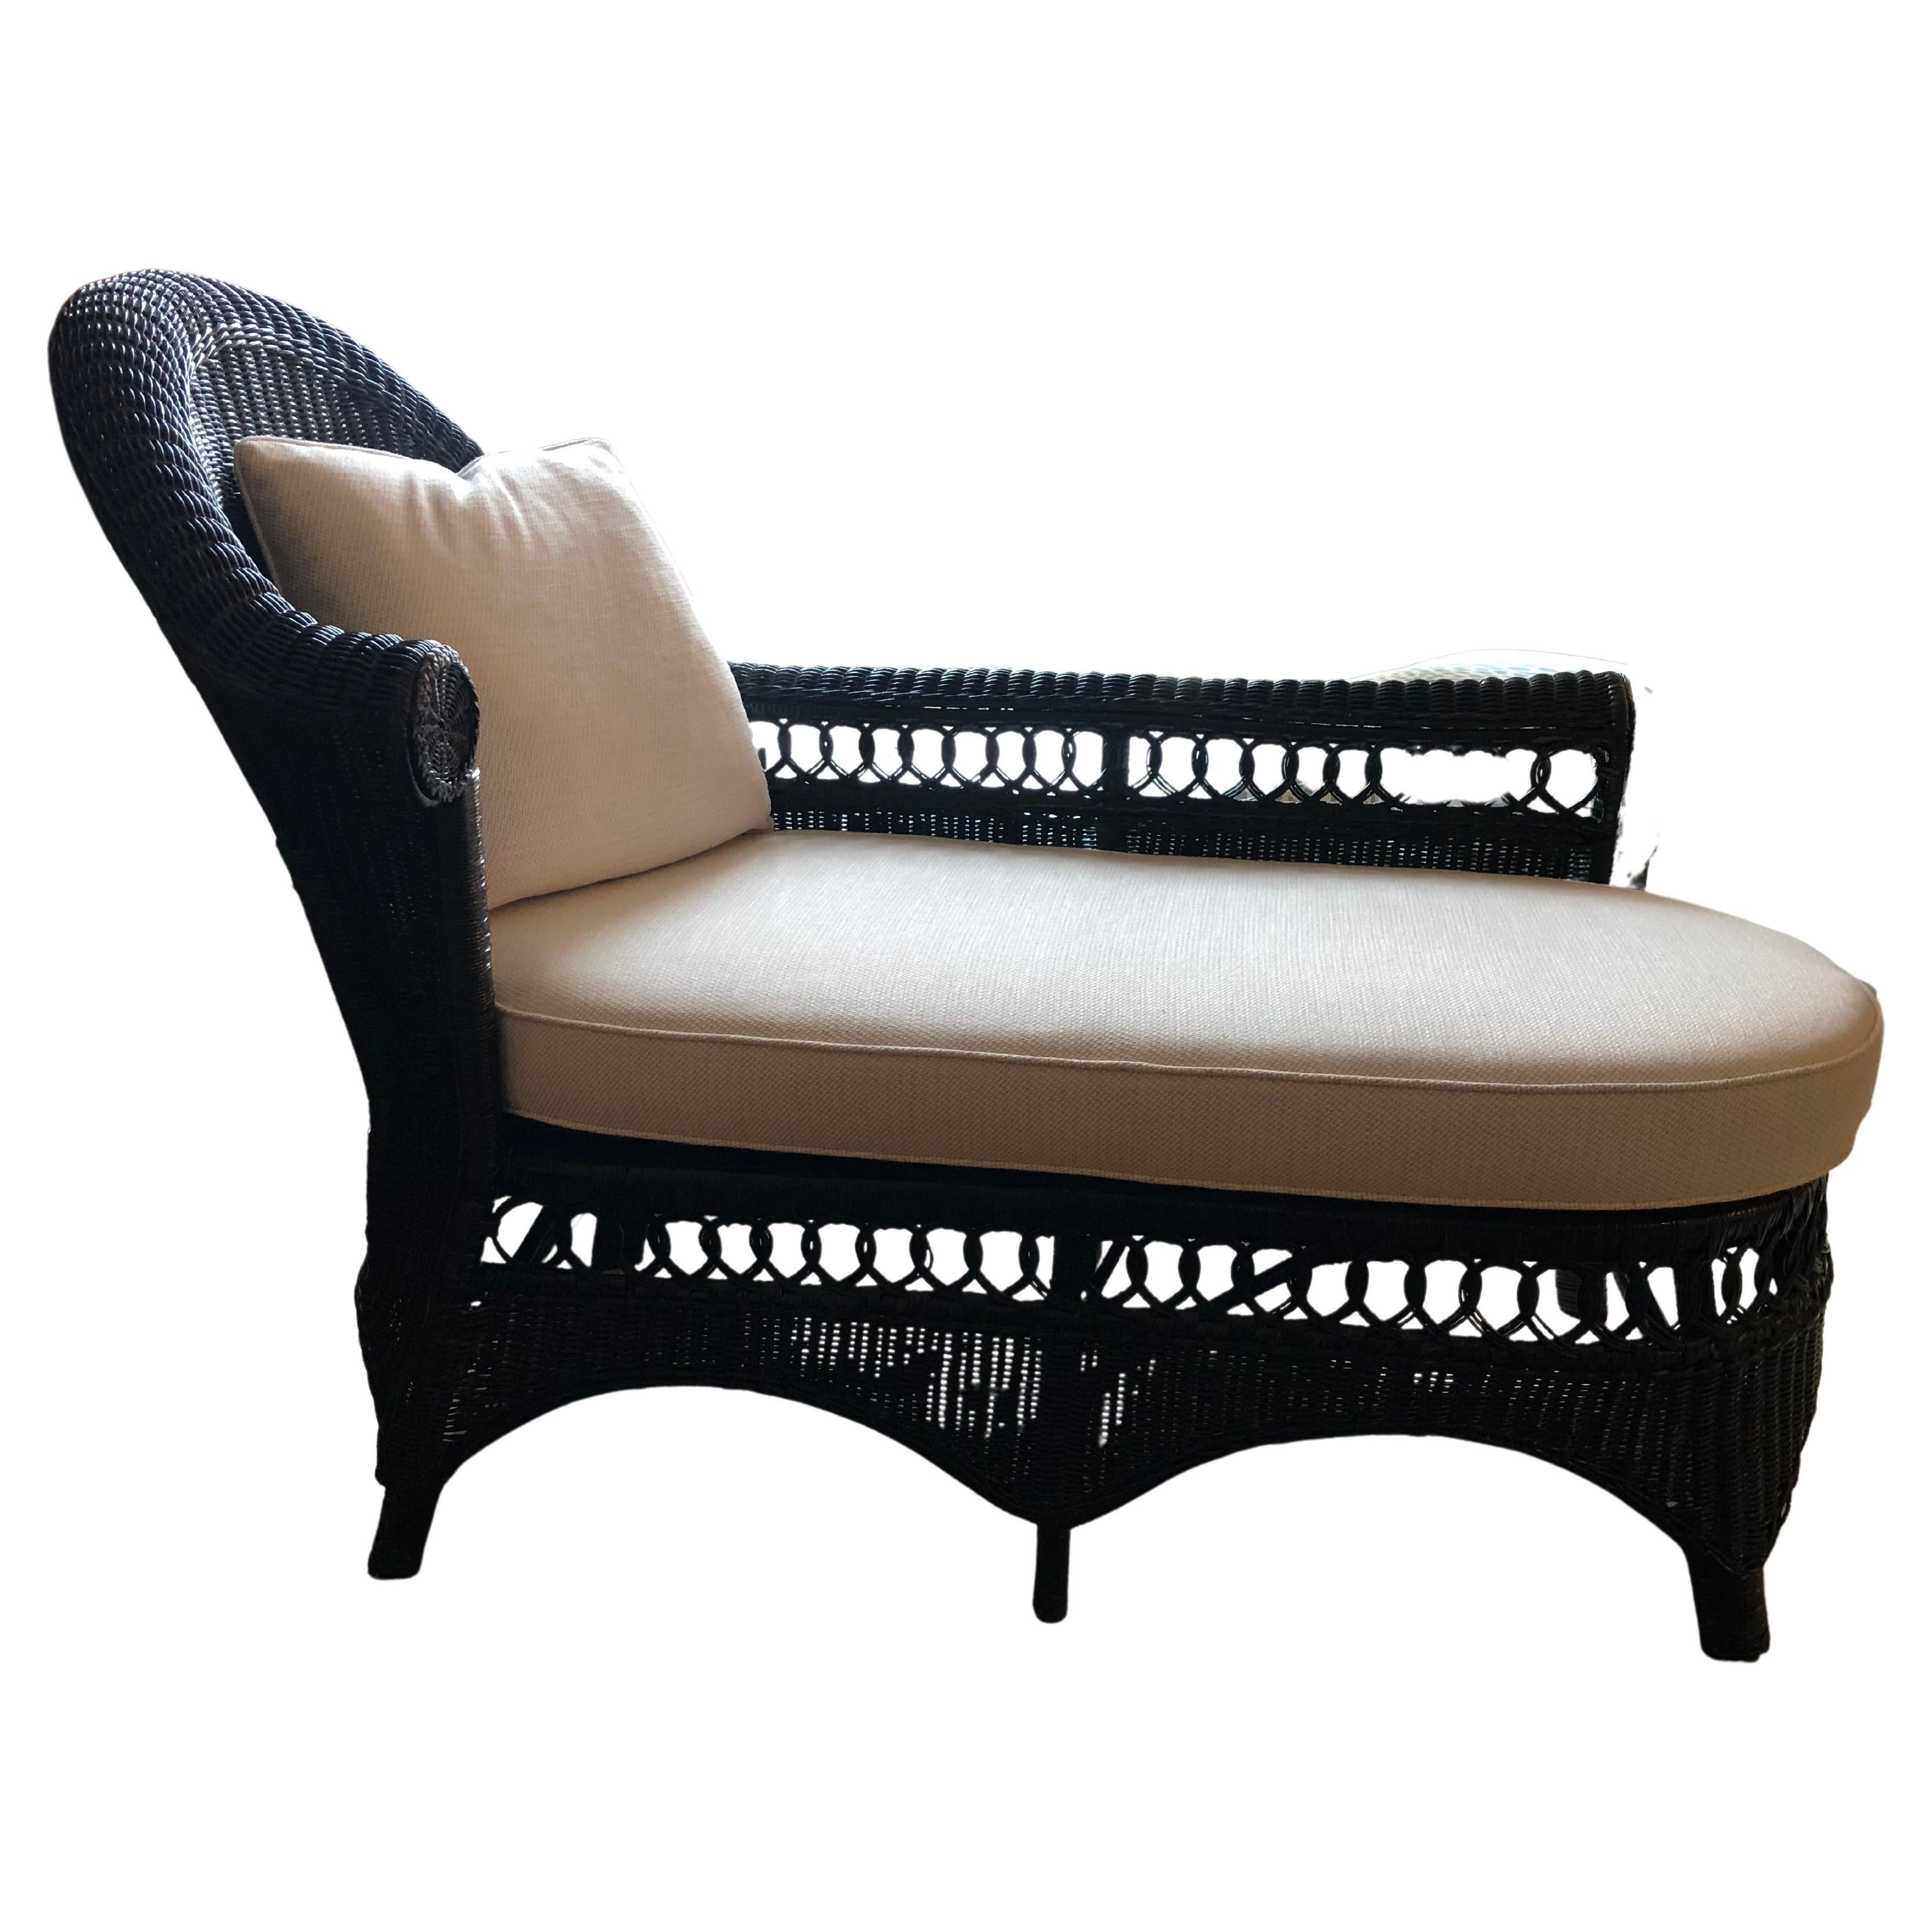 Incredible Restored Vintage Painted Wicker Chaise Longue with New Cushion For Sale